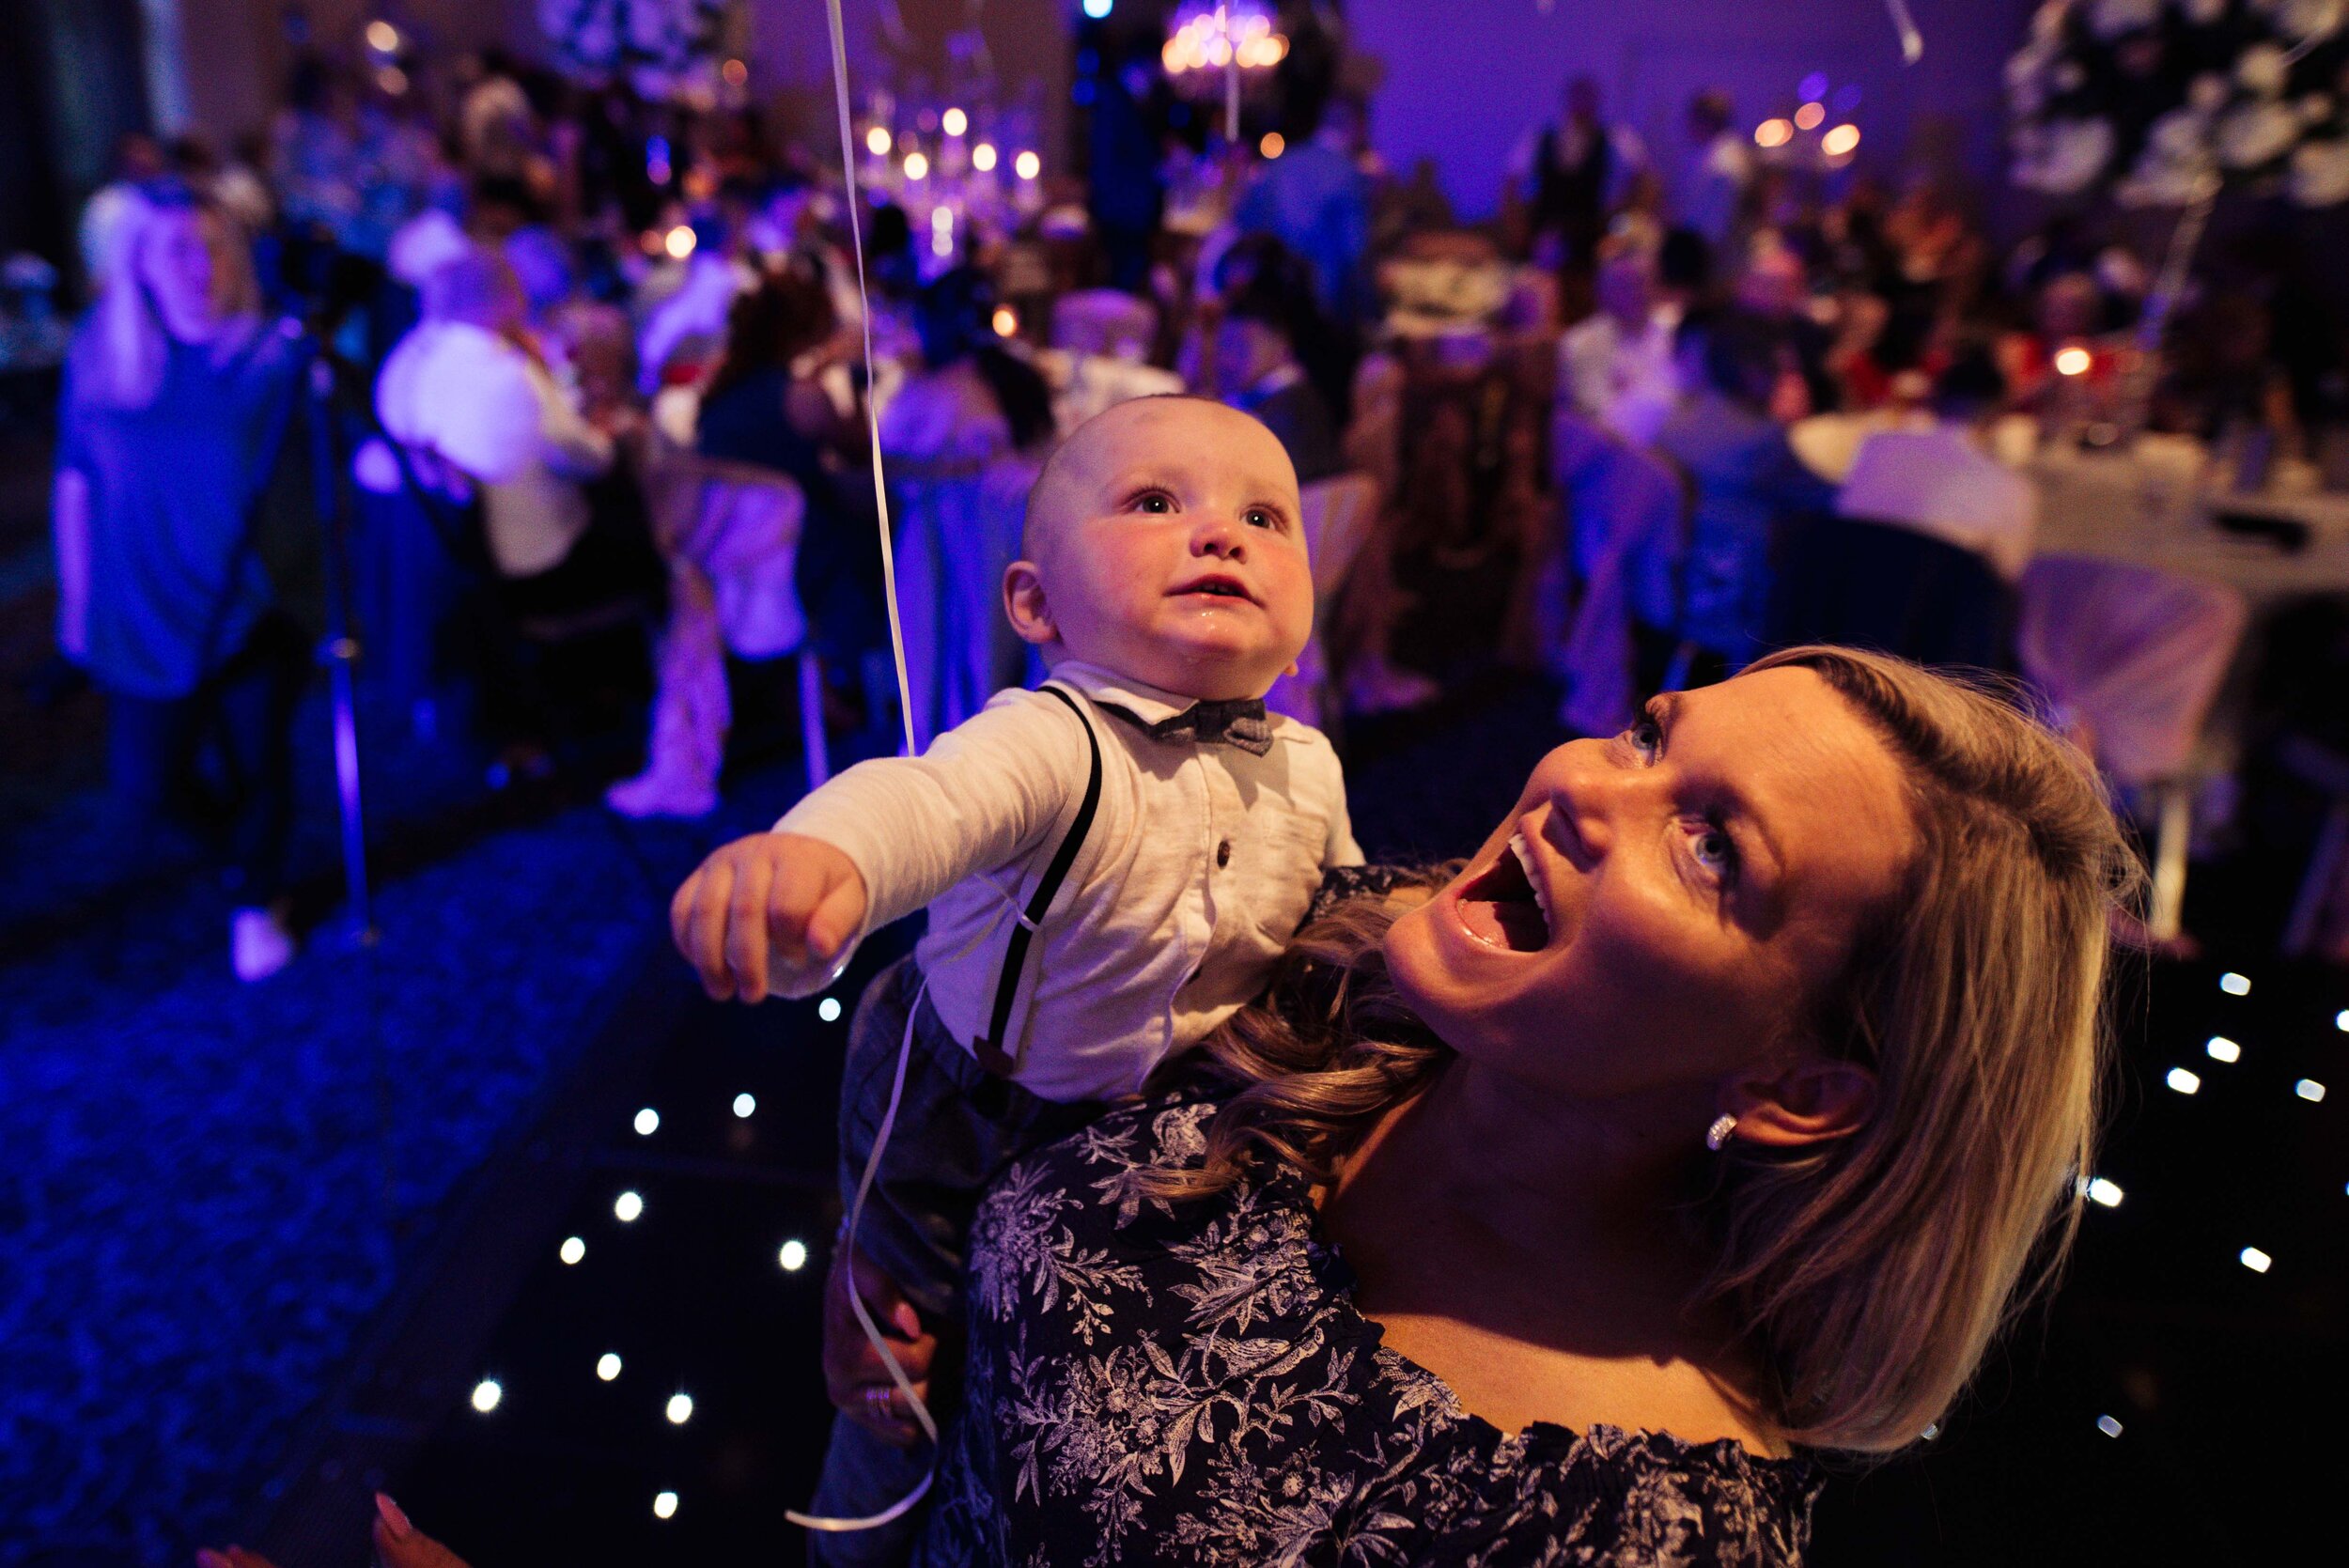 Young baby and his mum looking at the disco lights on the dance floor